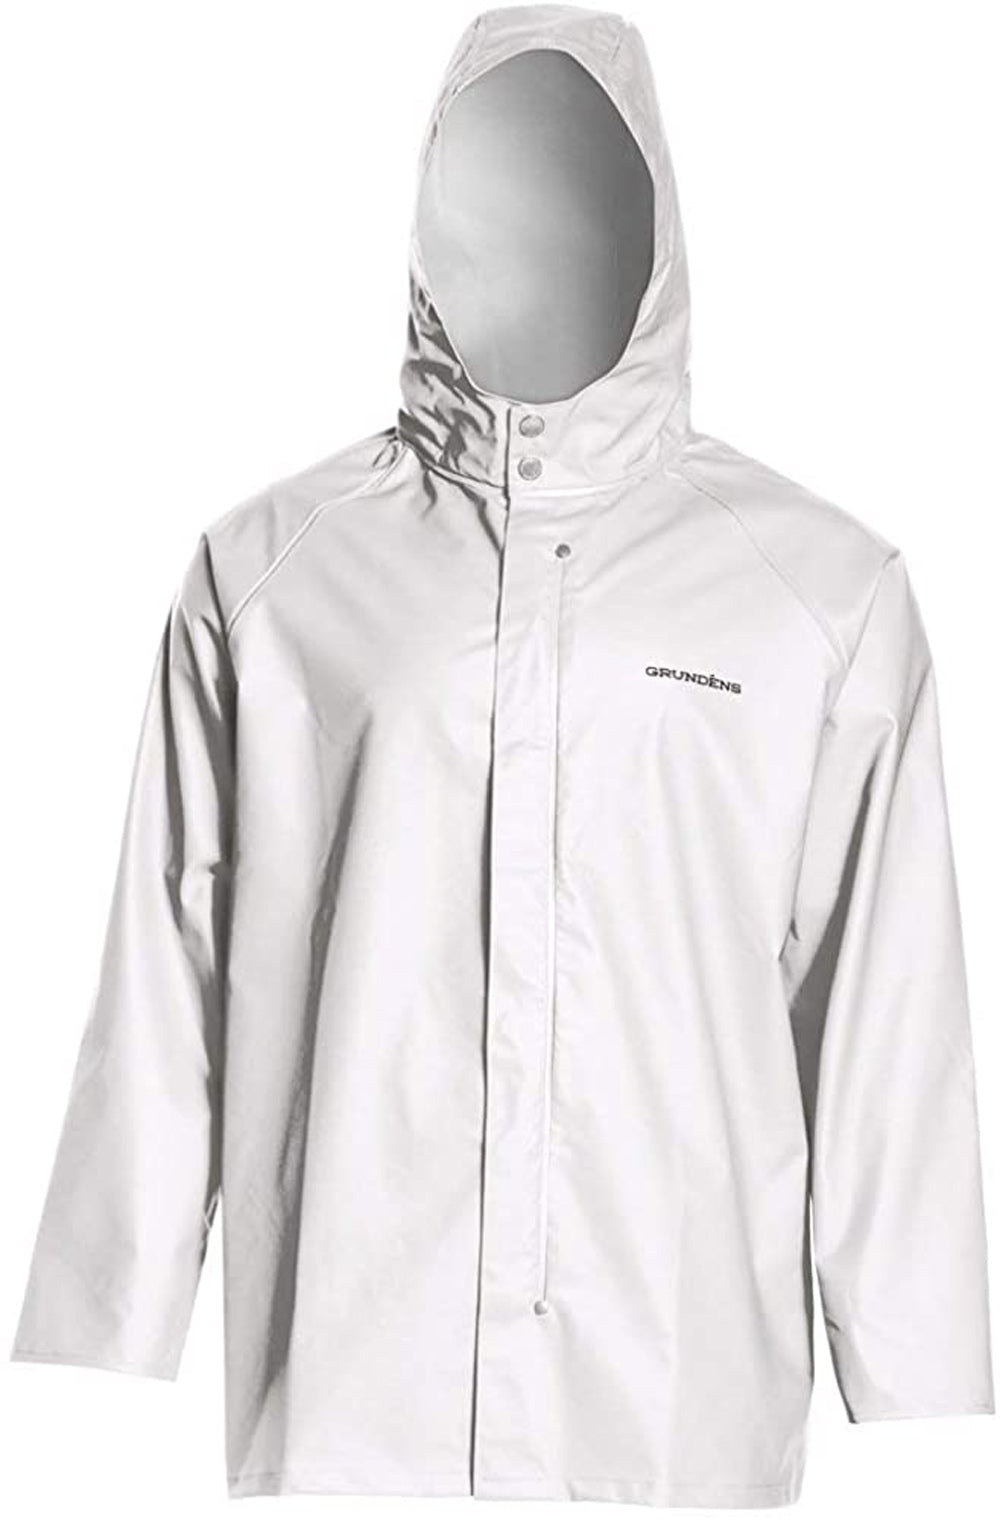 Shoreman Jacket in White color from the front view